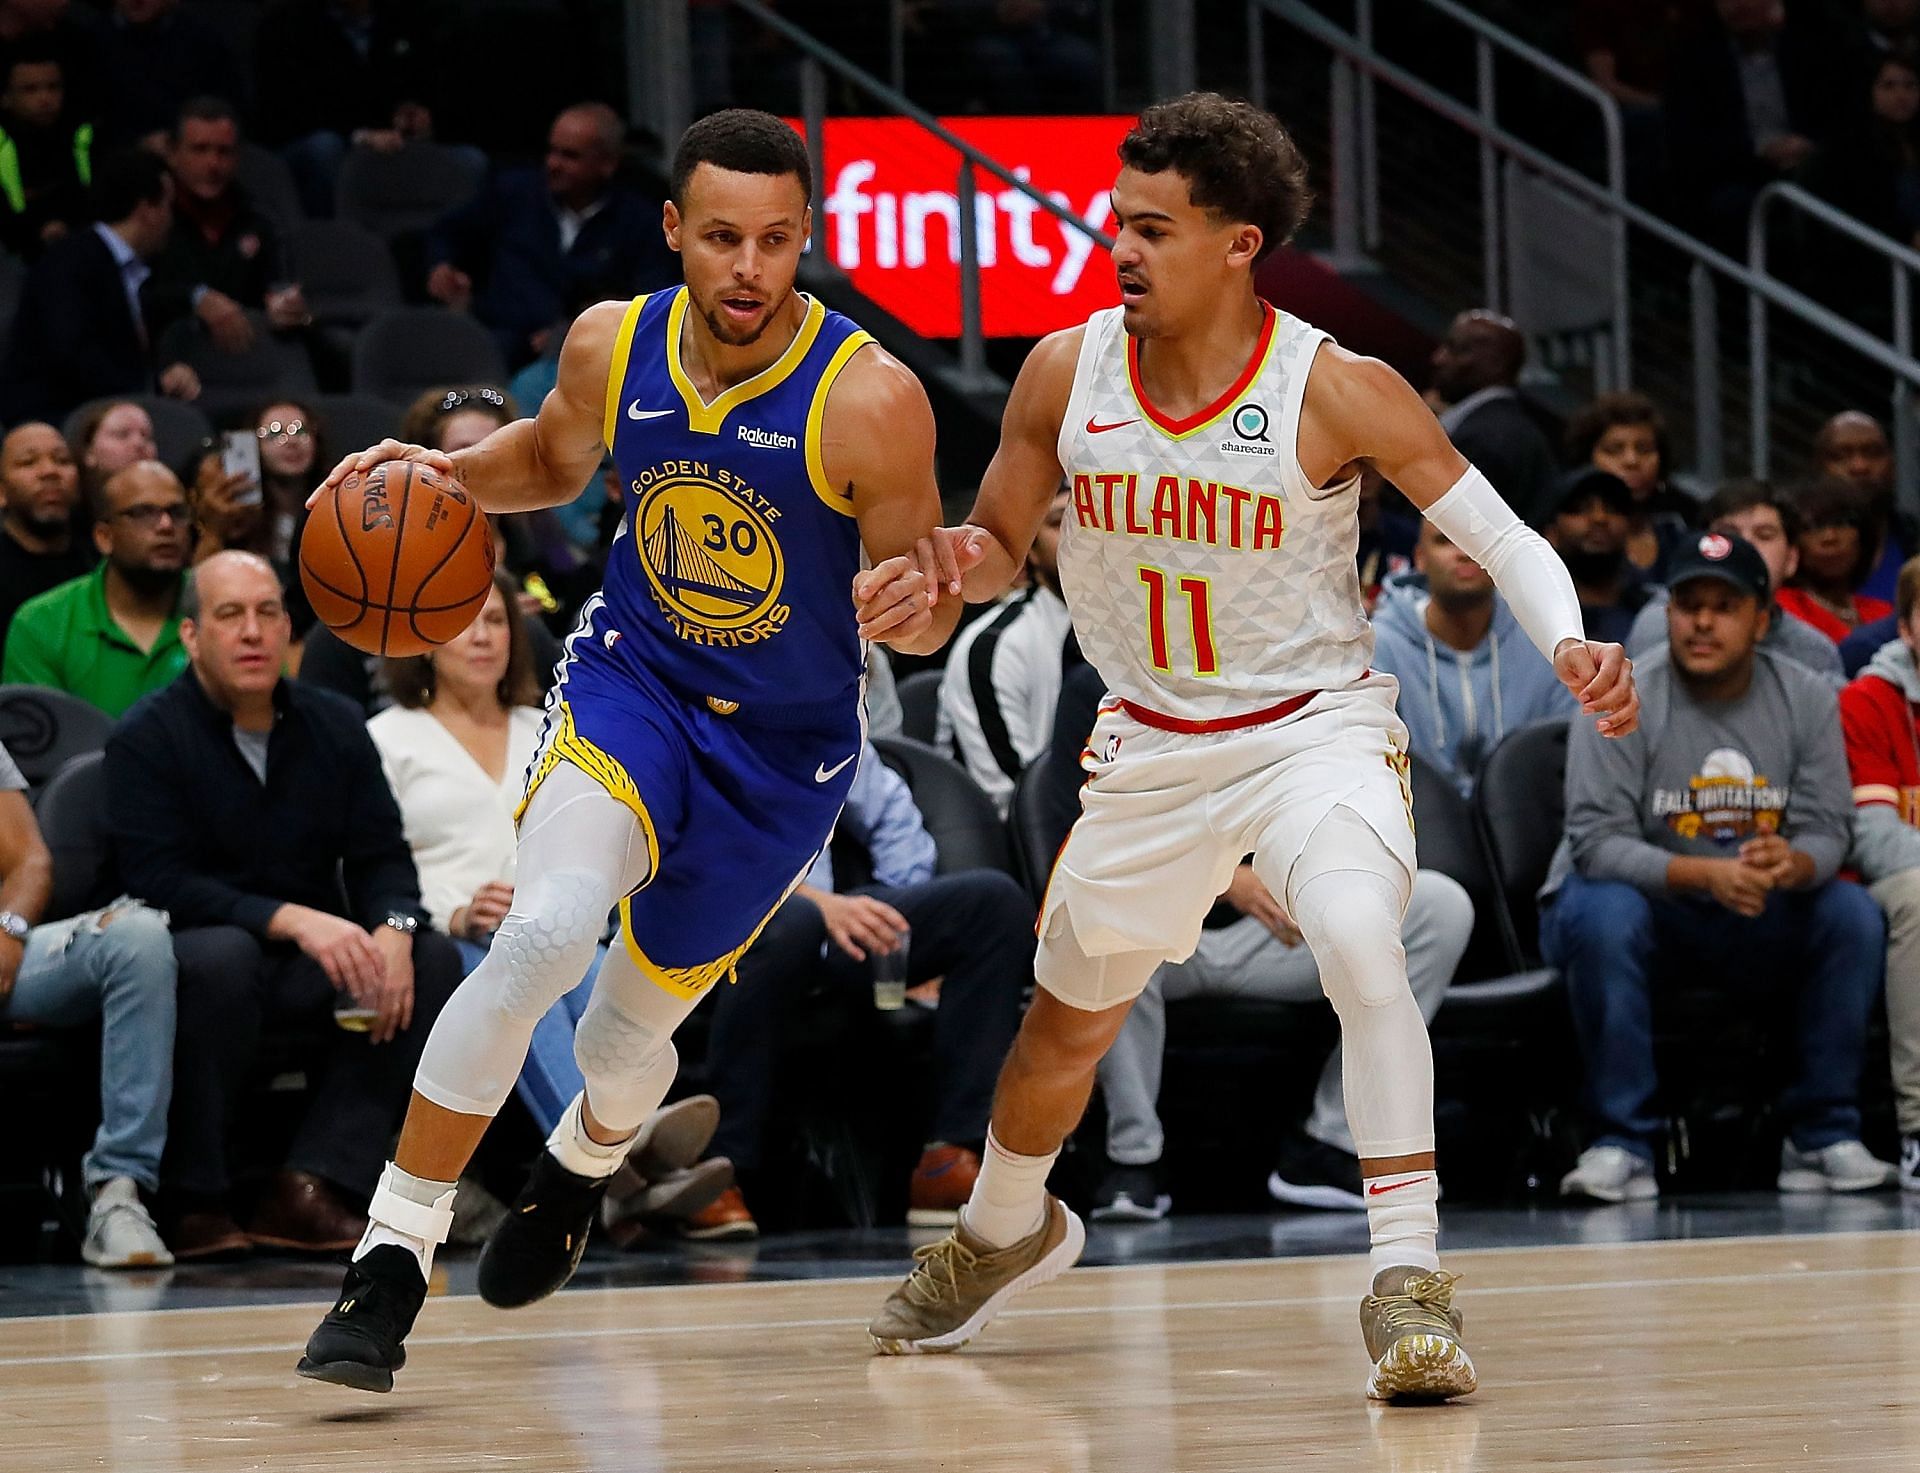 Steph Curry of the Golden State Warriors versus Trae Young of the Atlanta Hawks in 2018